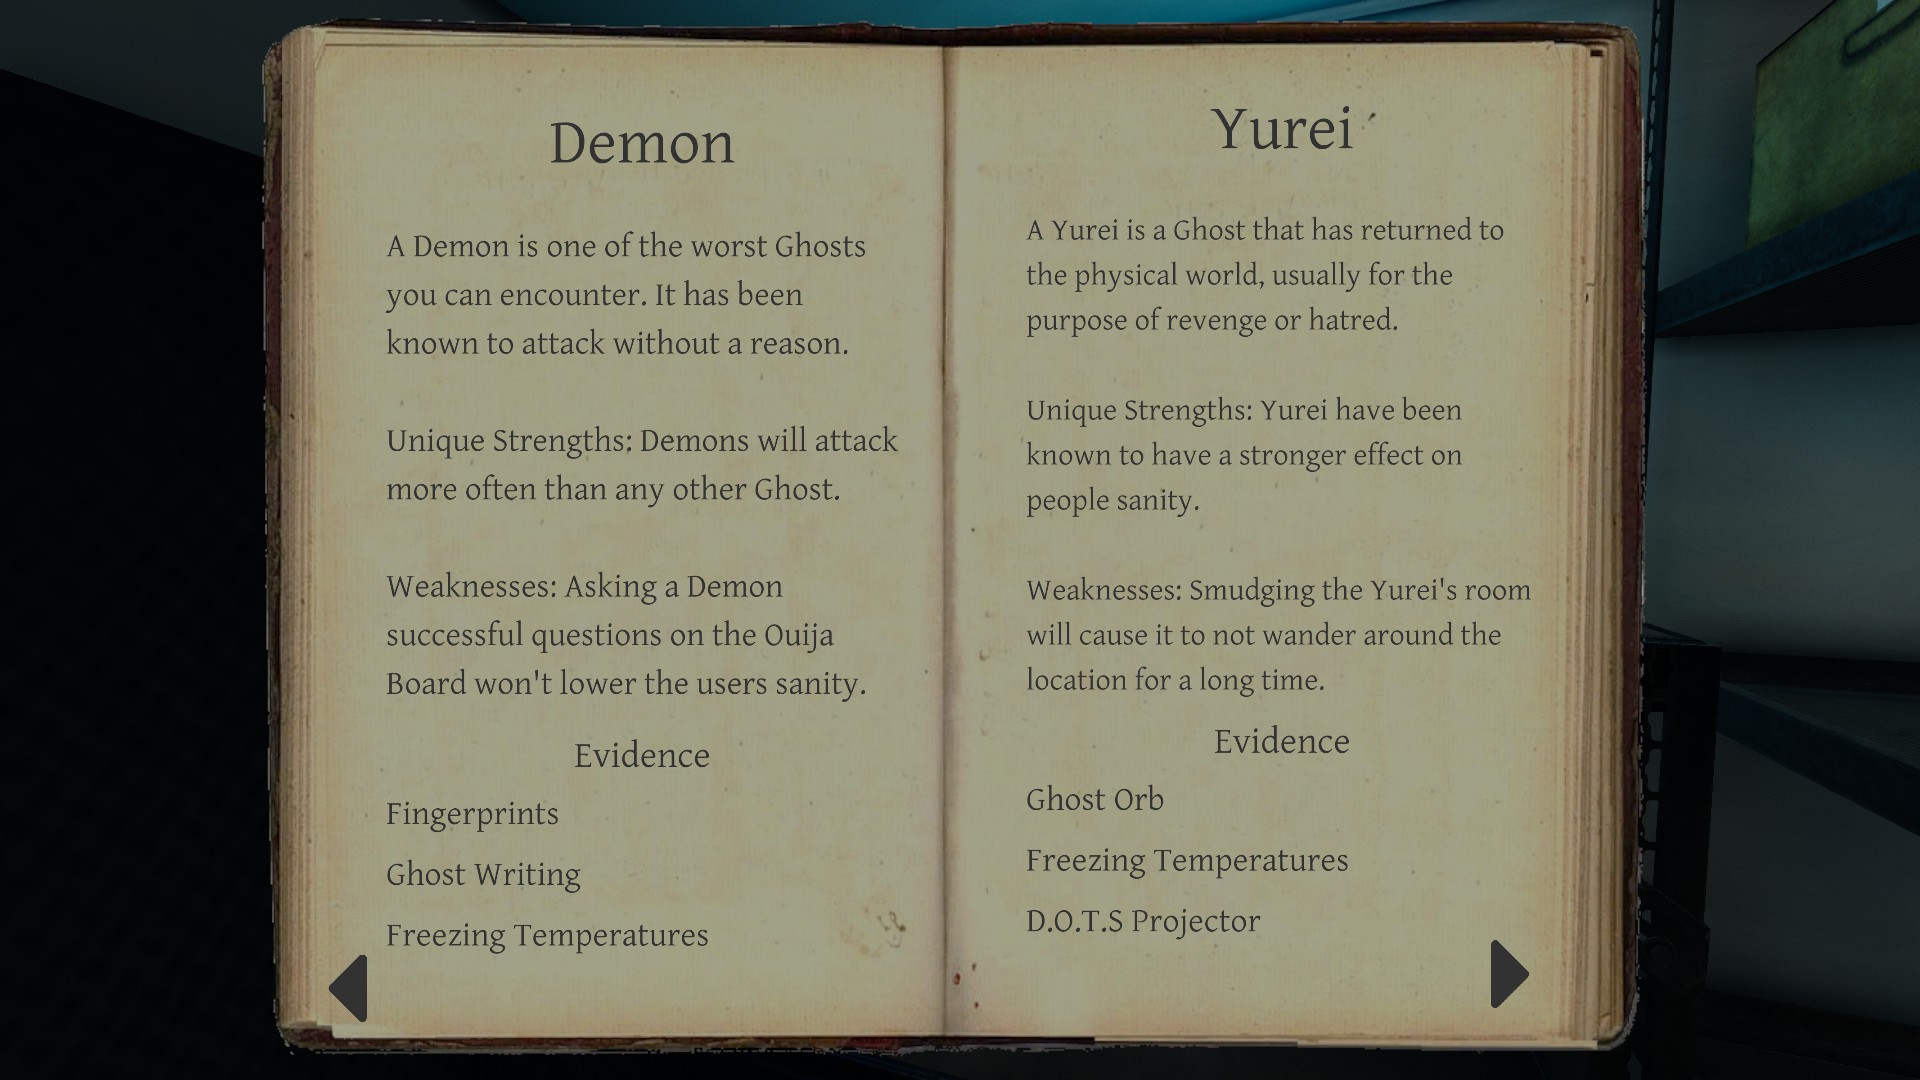 Phasmophobia List of New Ghosts in Game - All Evidence and Questions for Ghost Guide - Demon - Yurei - 69D1095